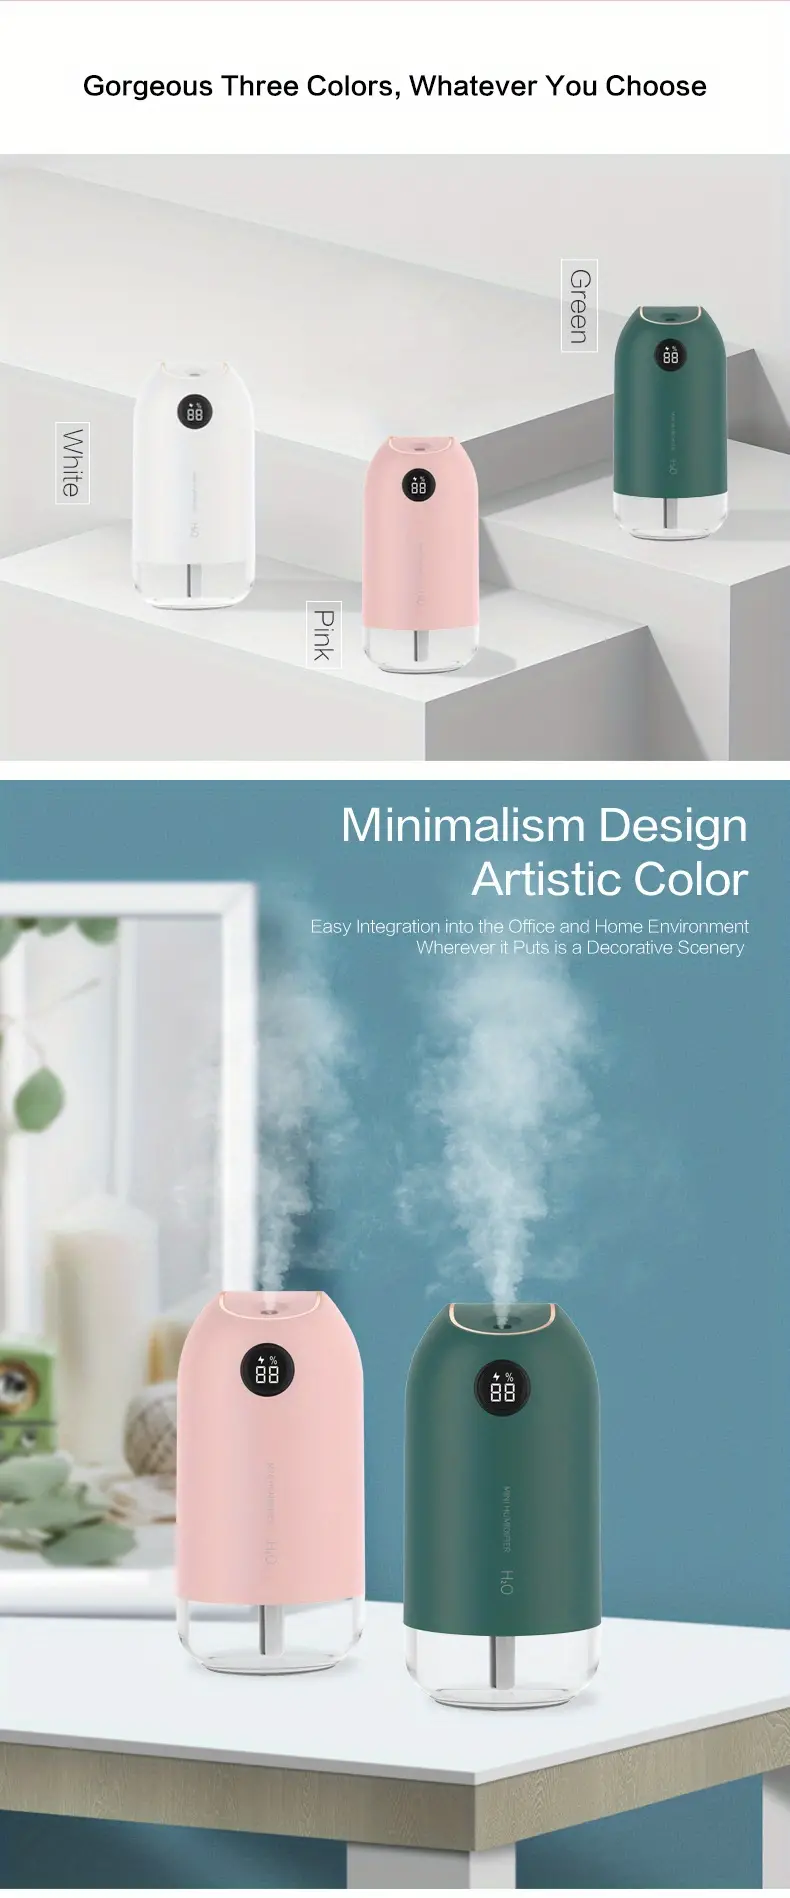 portable mini humidifier 500ml small humidifier type c personal desktop humidifier for baby bedroom travel office car household water shortage protection 2 spray modes super quiet night light white details 6